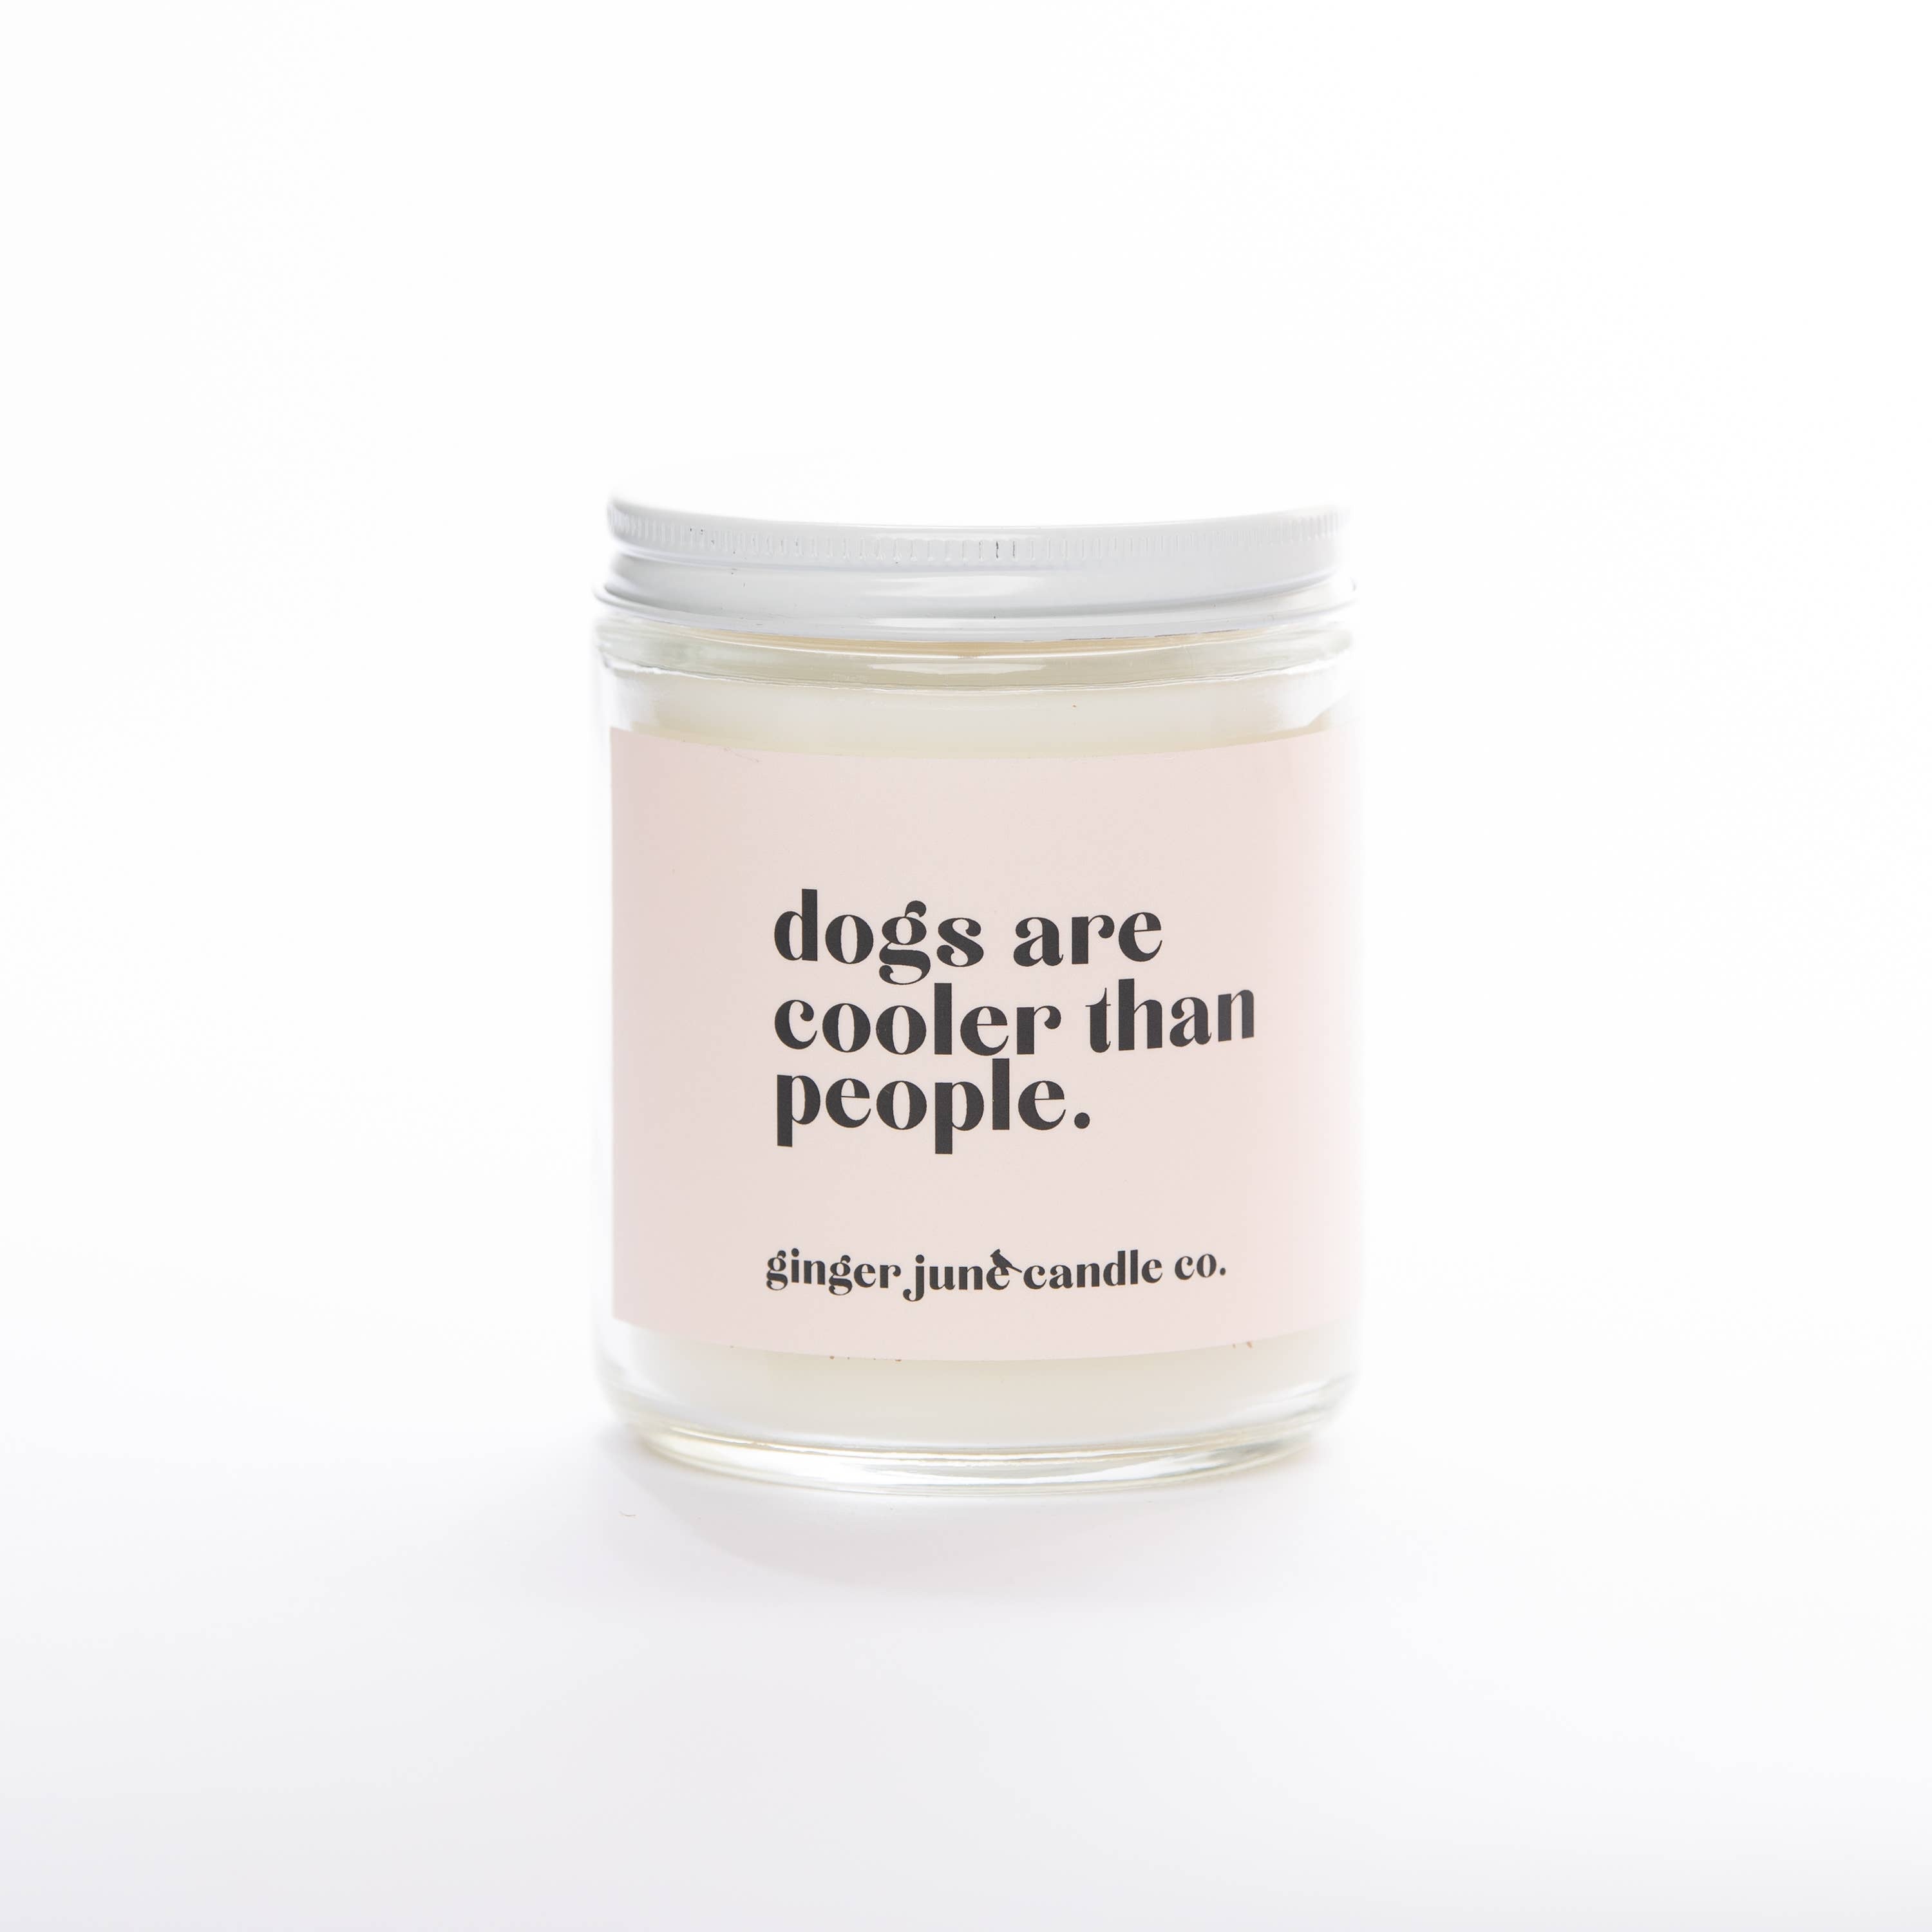 DOGS ARE COOLER THAN PEOPLE • NON TOXIC SOY CANDLE